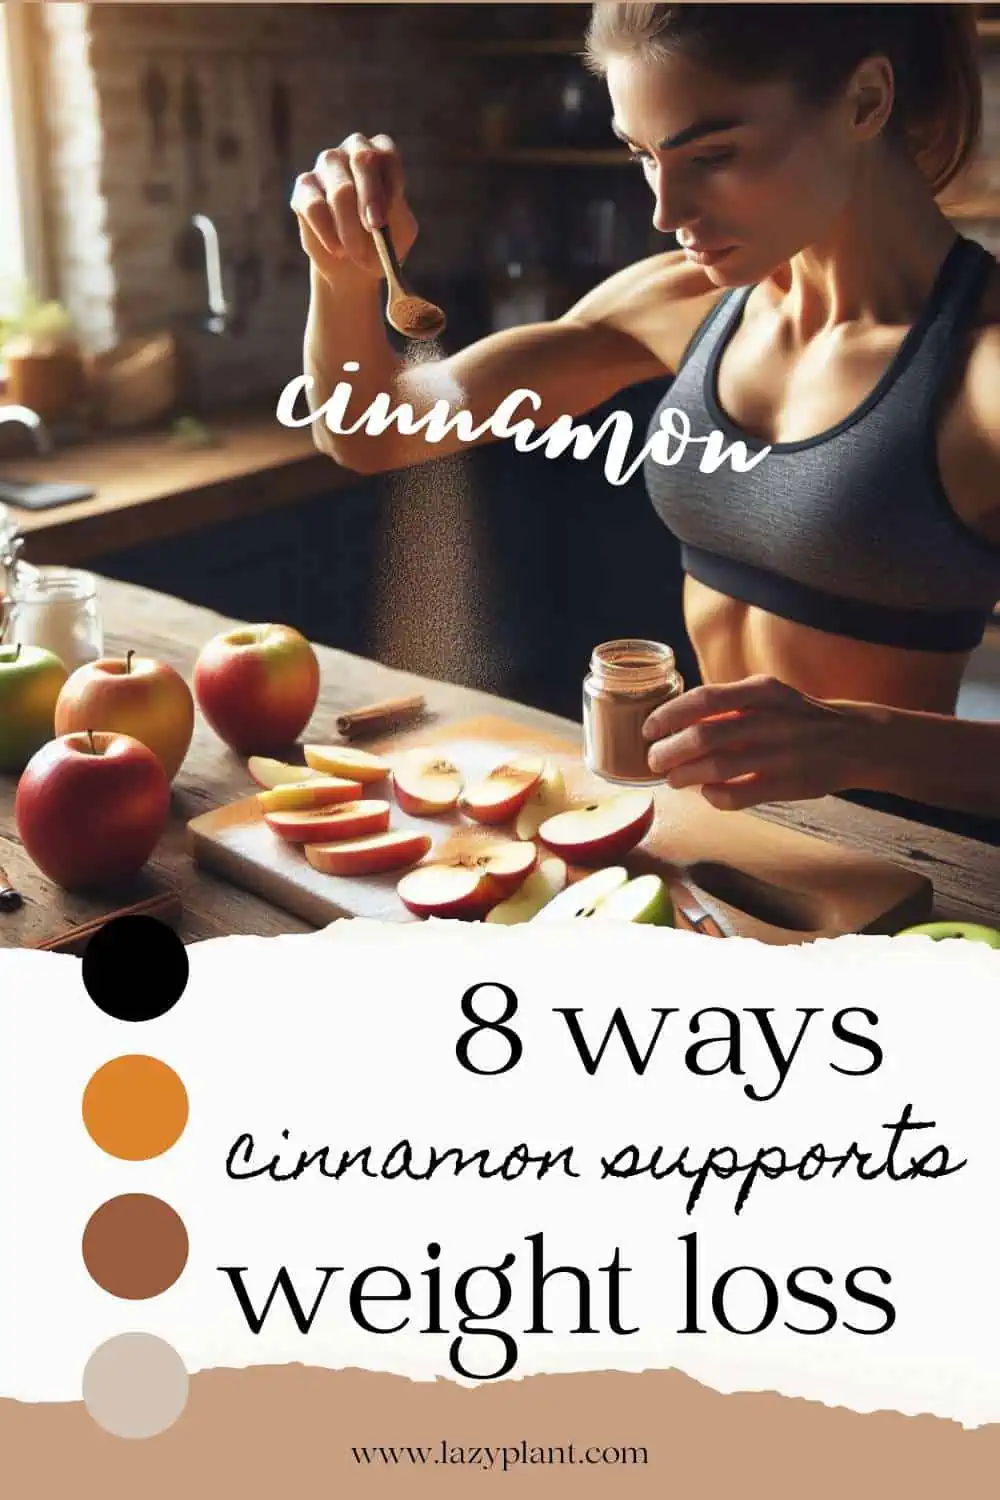 8 reasons why Cinnamon supports Weight Loss!